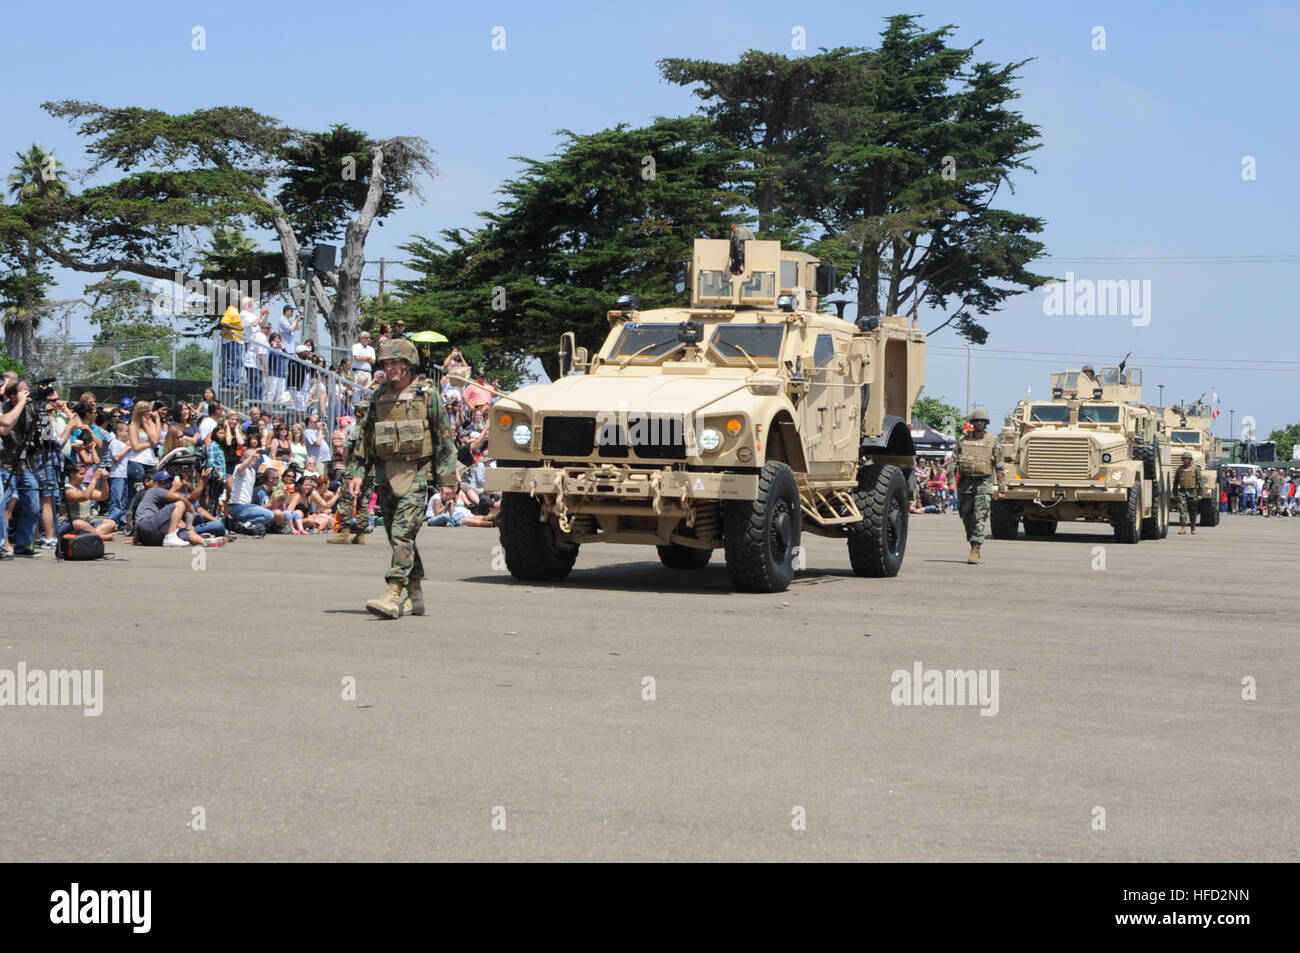 Seabees from Naval Mobile Construction Battalion 3’s Convoy Security Element team drive Mine Resistant Ambush Protected Vehicles in front of a crowd during Seabee Days, here on the Port Hueneme ceremonial grinder July 23. This was the 24th Seabee Days held in Port Hueneme since 1986 and is a two day celebration honoring the men and women of the Navy’s elite construction force. Seabees are an expeditionary element of U.S. Naval forces providing construction, engineering and security services in support of national strategy, naval power projection, humanitarian assistance and contingency operati Stock Photo